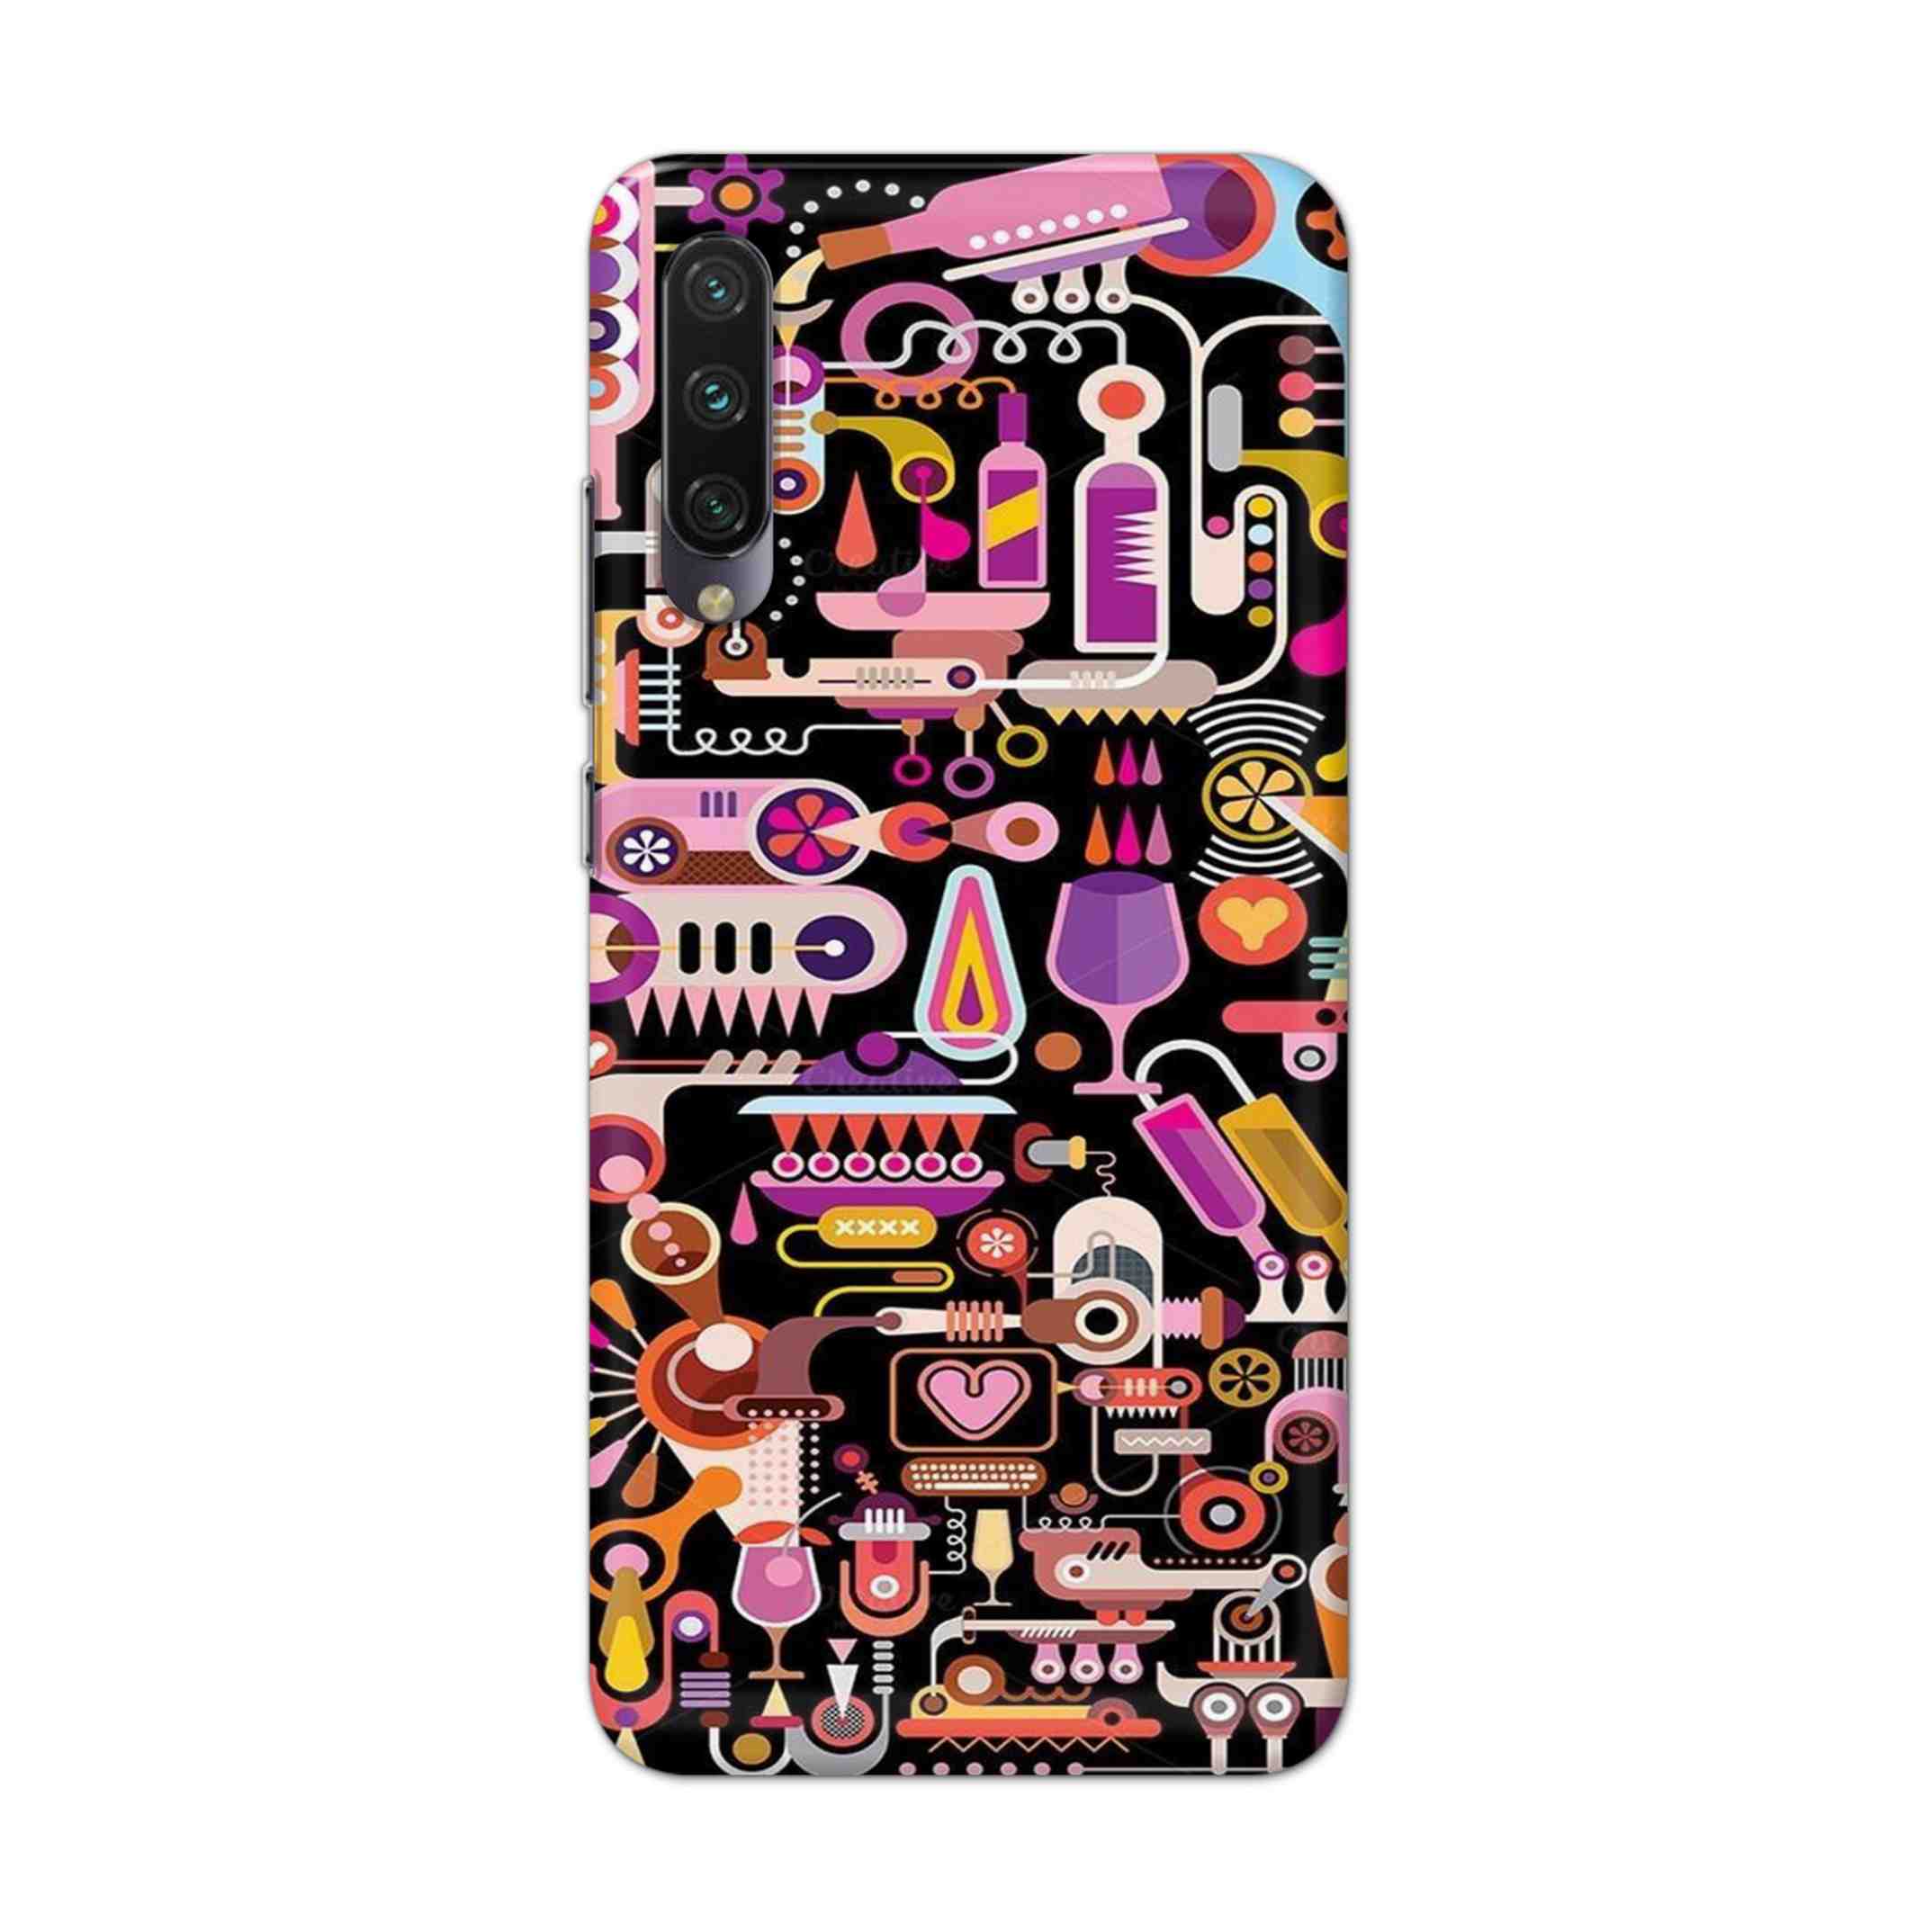 Buy Lab Art Hard Back Mobile Phone Case Cover For Xiaomi Mi A3 Online